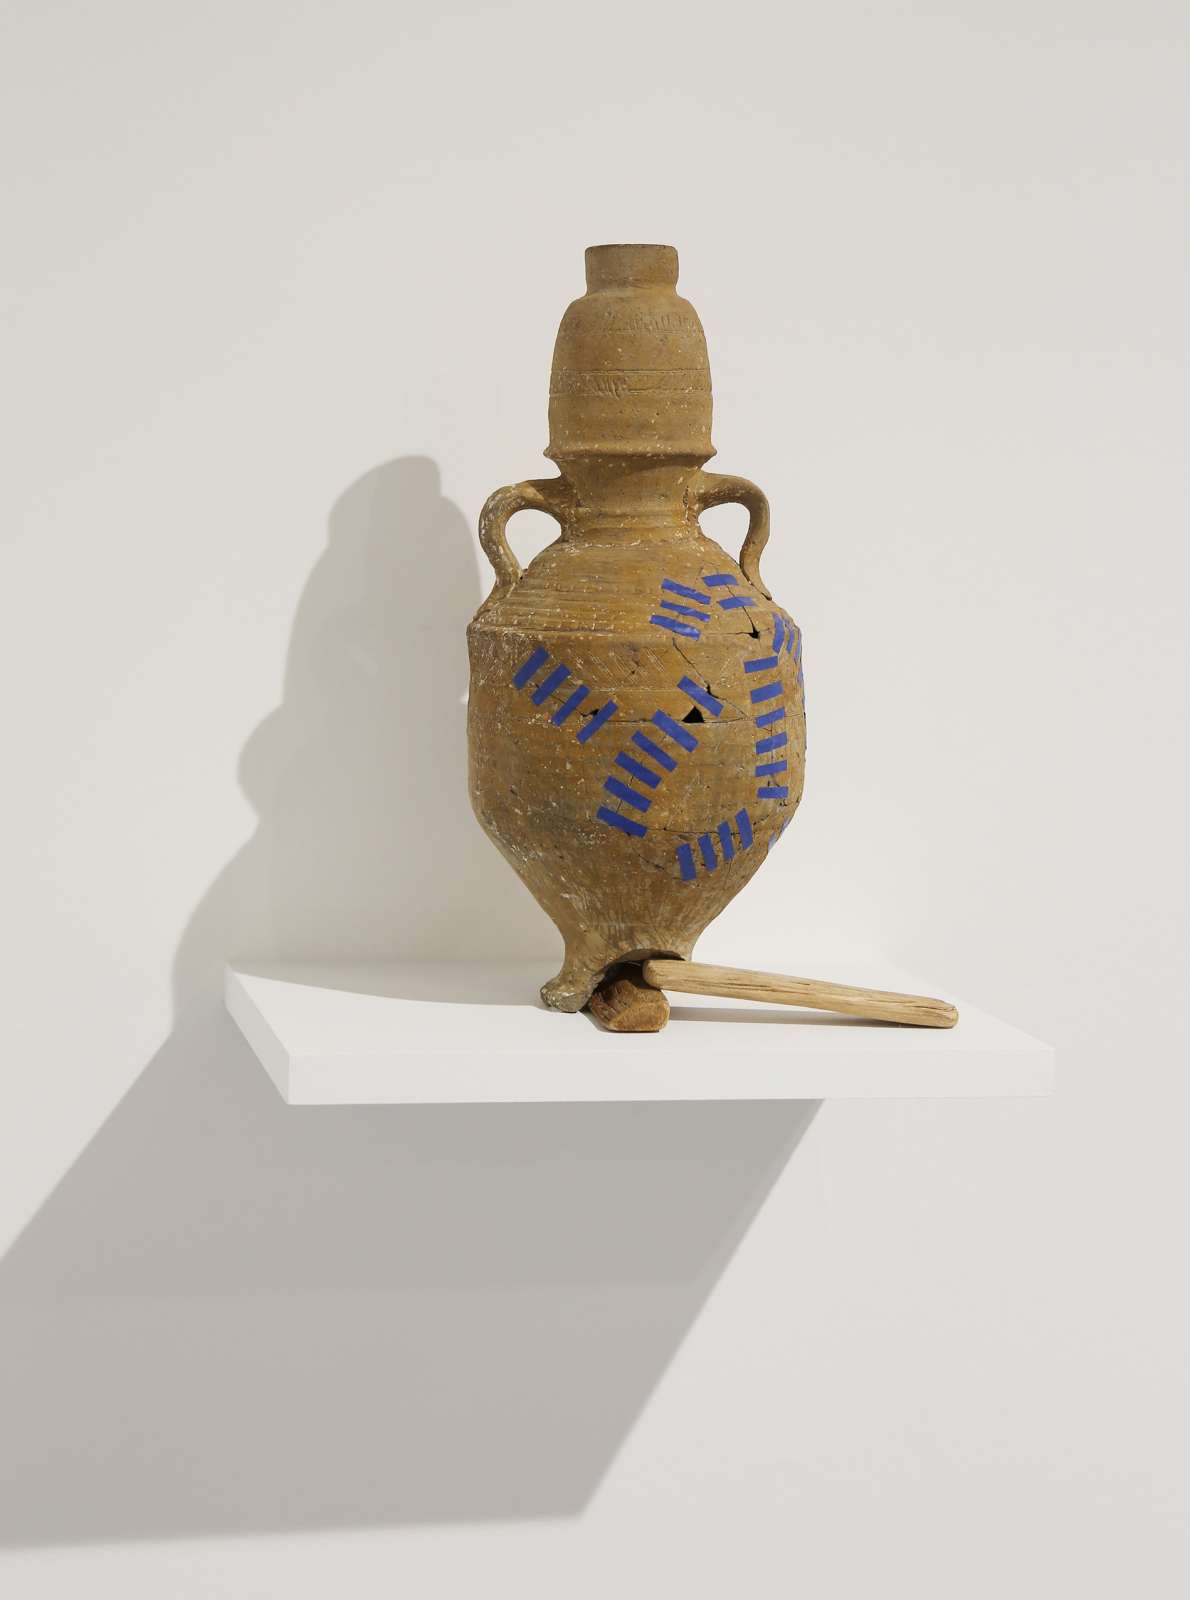 Ali Cherri, 'Grafting E', 2018. Jar with two handles from the Mediterranean Basin 900 1100 AD. Reparation tape wood, 34 X 30 X 20 cm. Courtesy of the artist and Galerie Imane Farès, Paris.